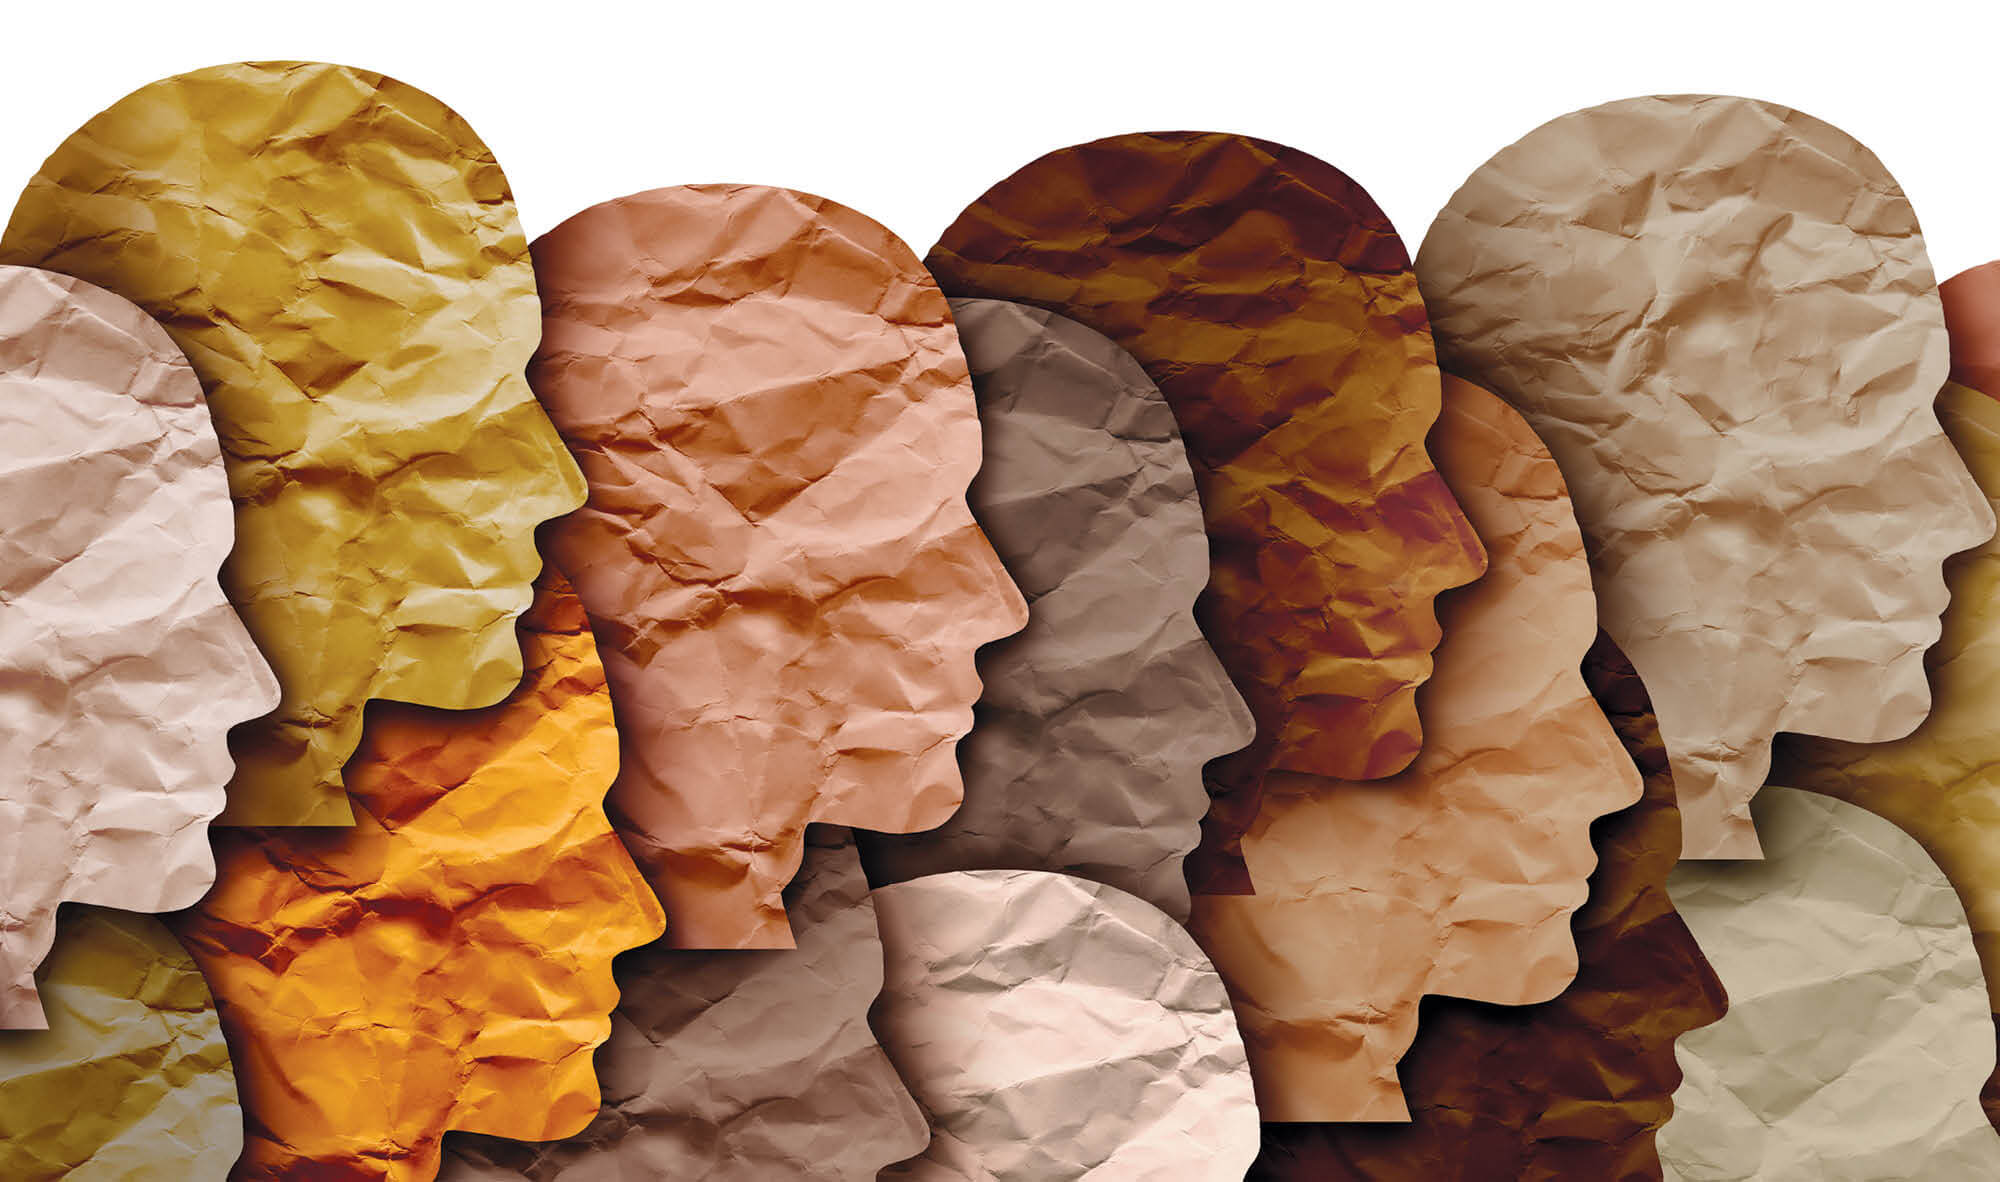 Crinkled-paper cut-outs of heads in various shades of skin tones.